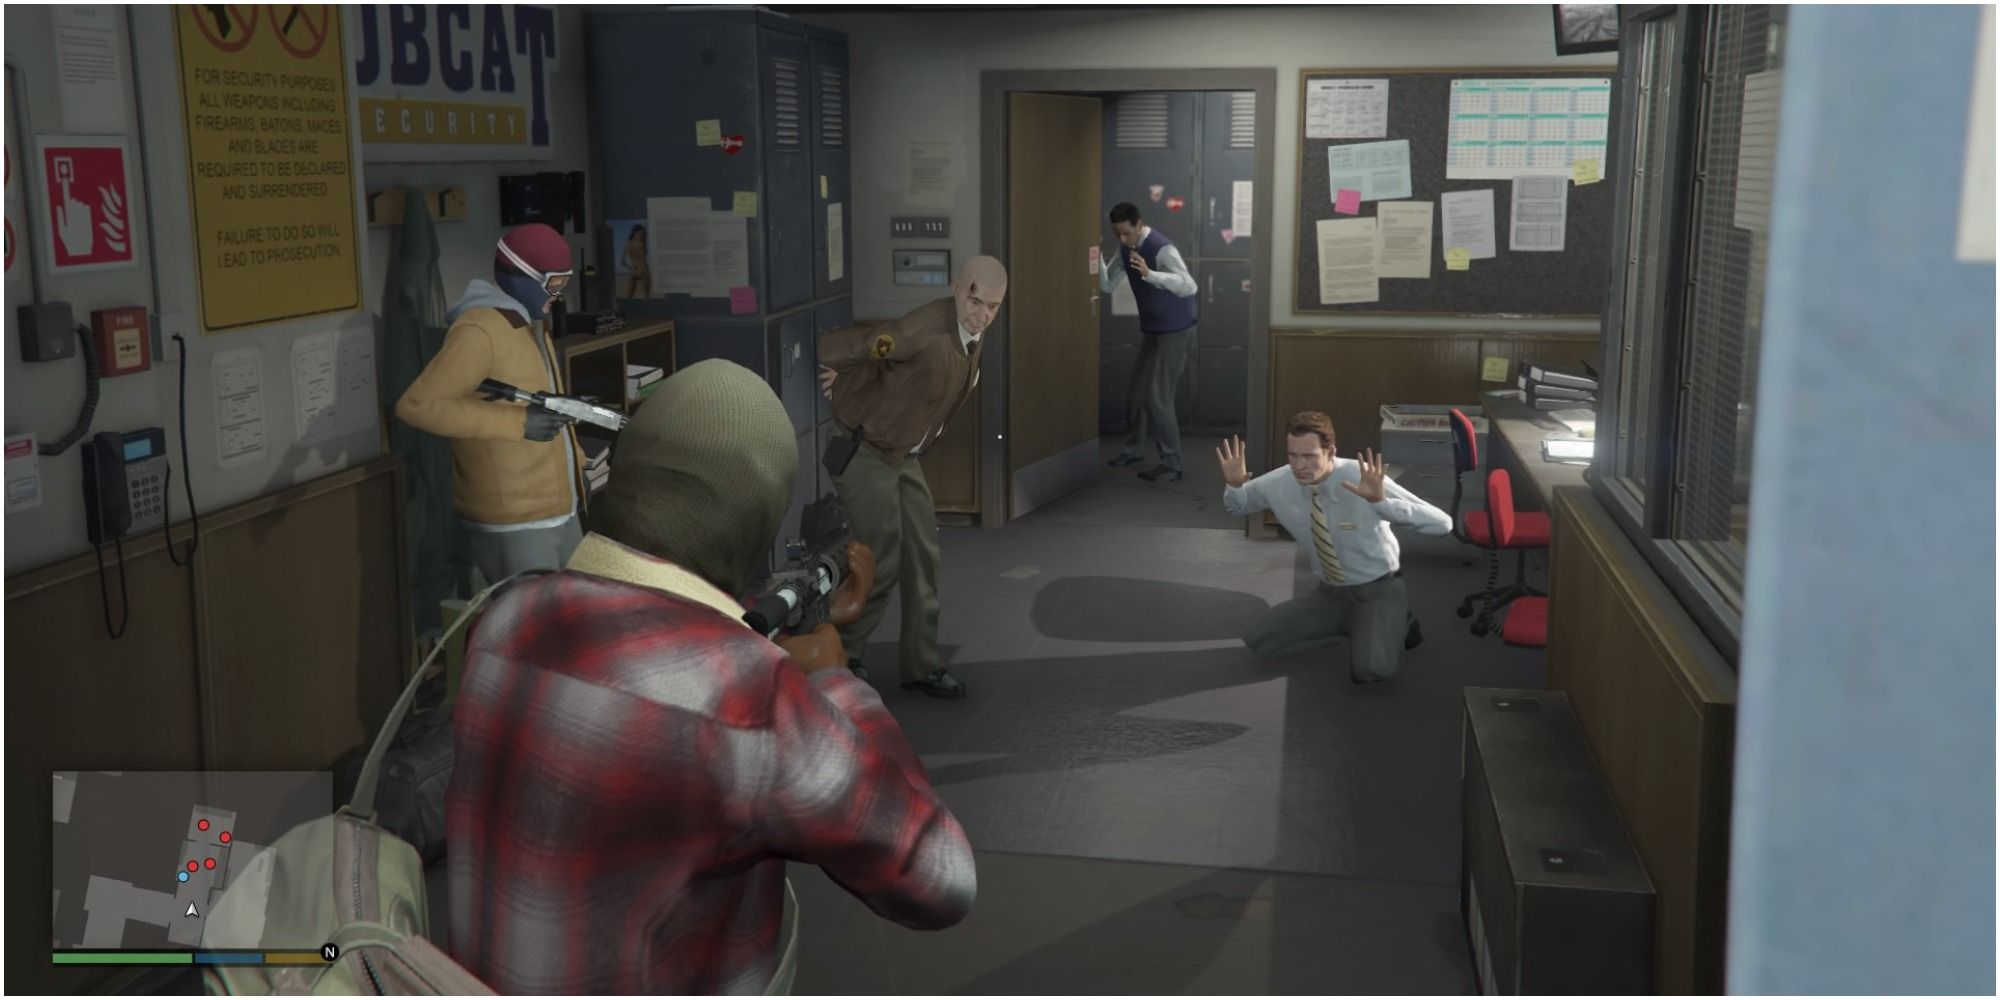 GTA V Prologue Mission Herding People Into Cupboard